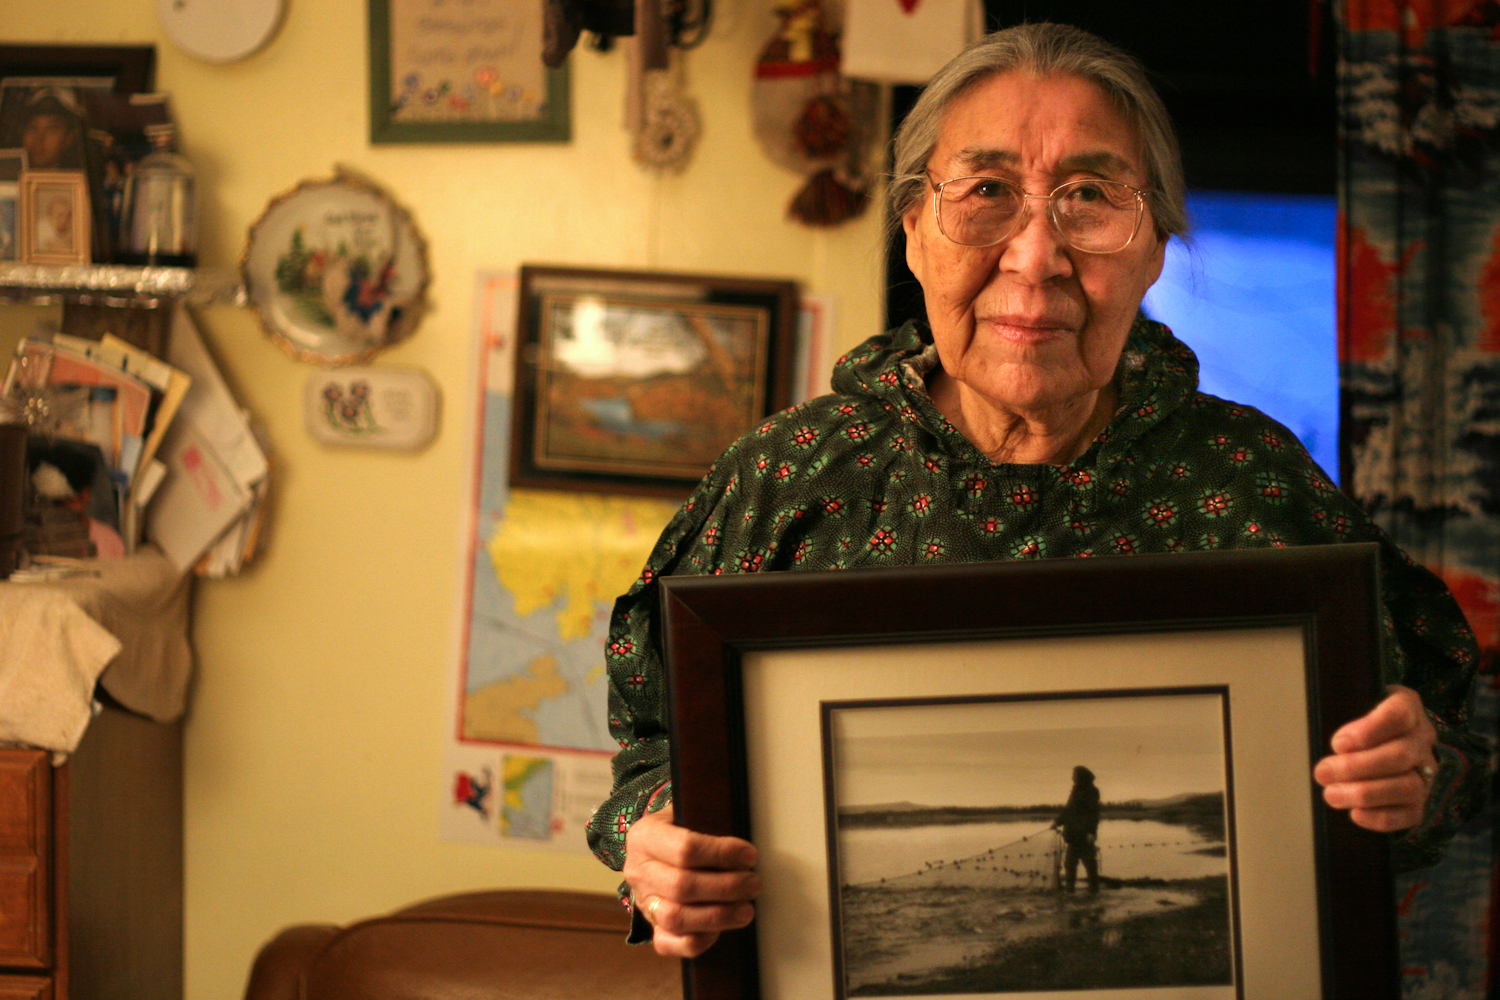   Minnie Gray, 73, was one of the first seven families to move to Ambler from one of the northern villages. She holds a photograph of when she was younger, seining whitefish and sheefish along the shores of Ambler River. "Things have changed, so many